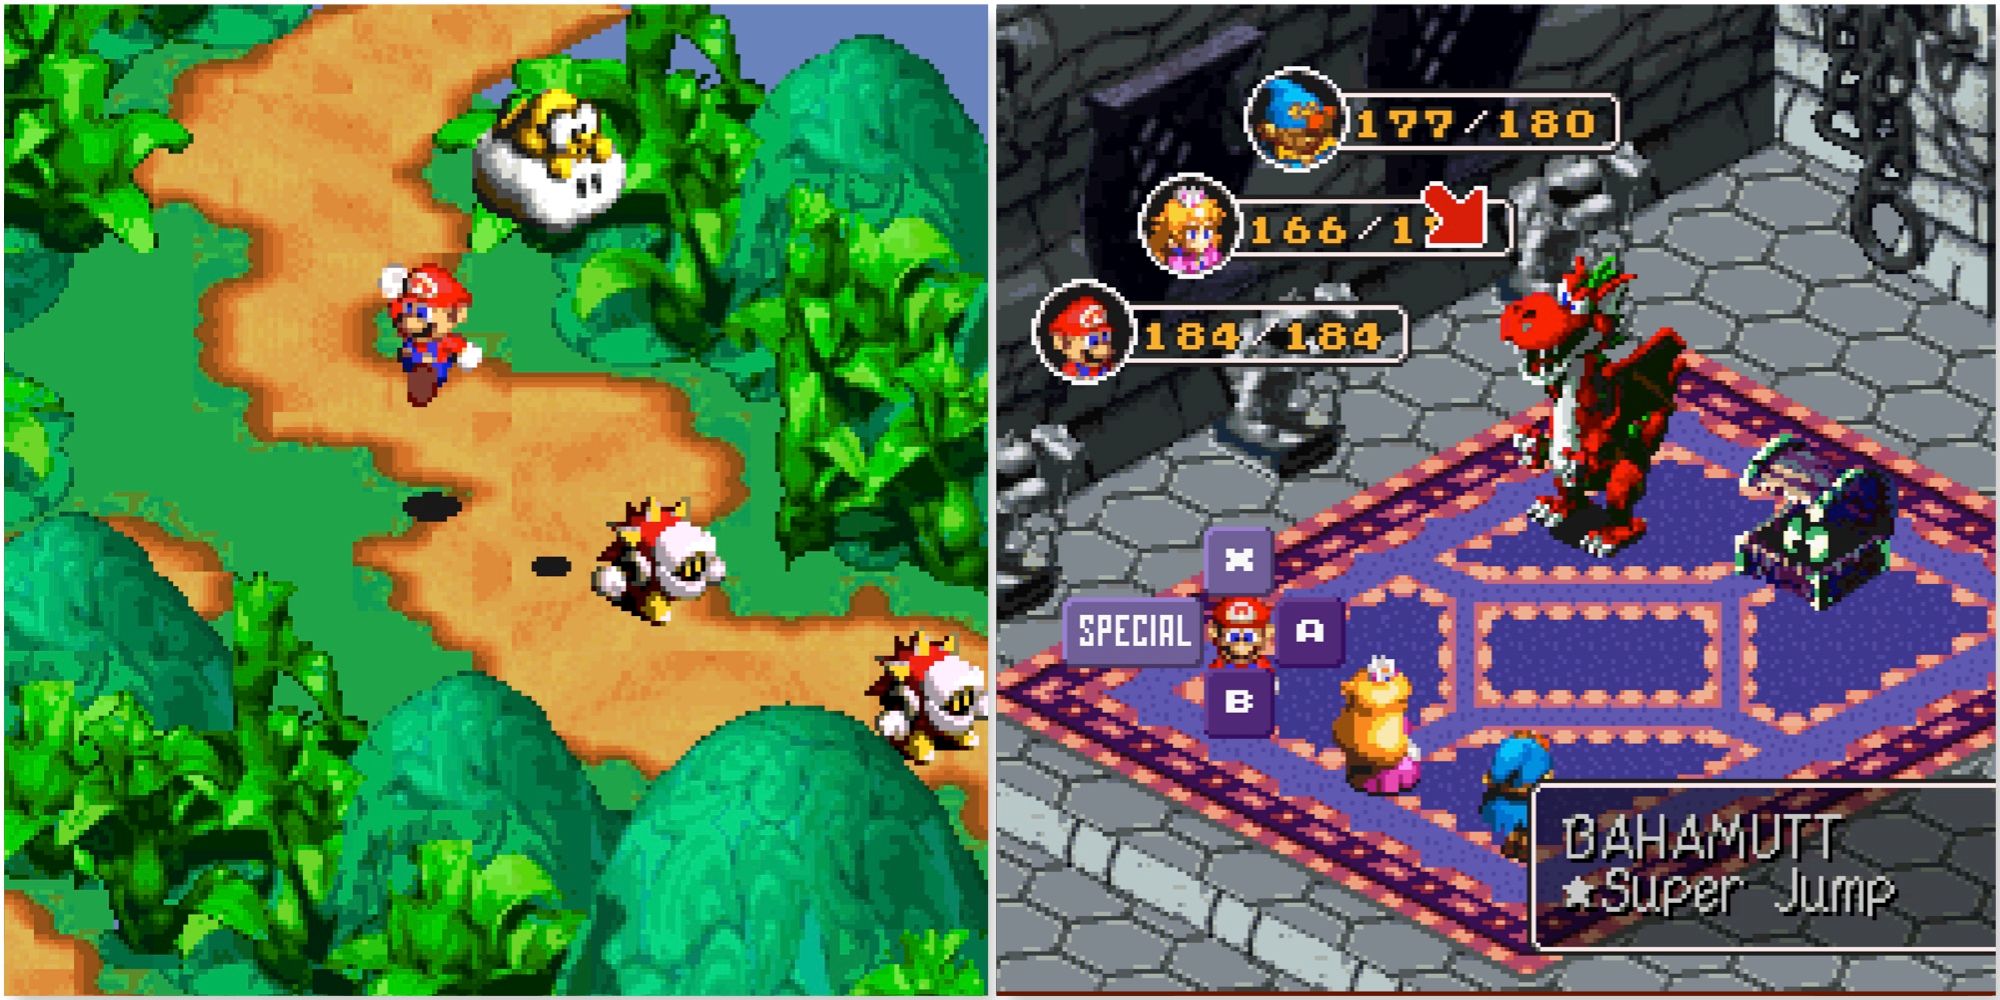 Exploring the world and fighting a battle in Super Mario RPG Legend of the Seven Stars